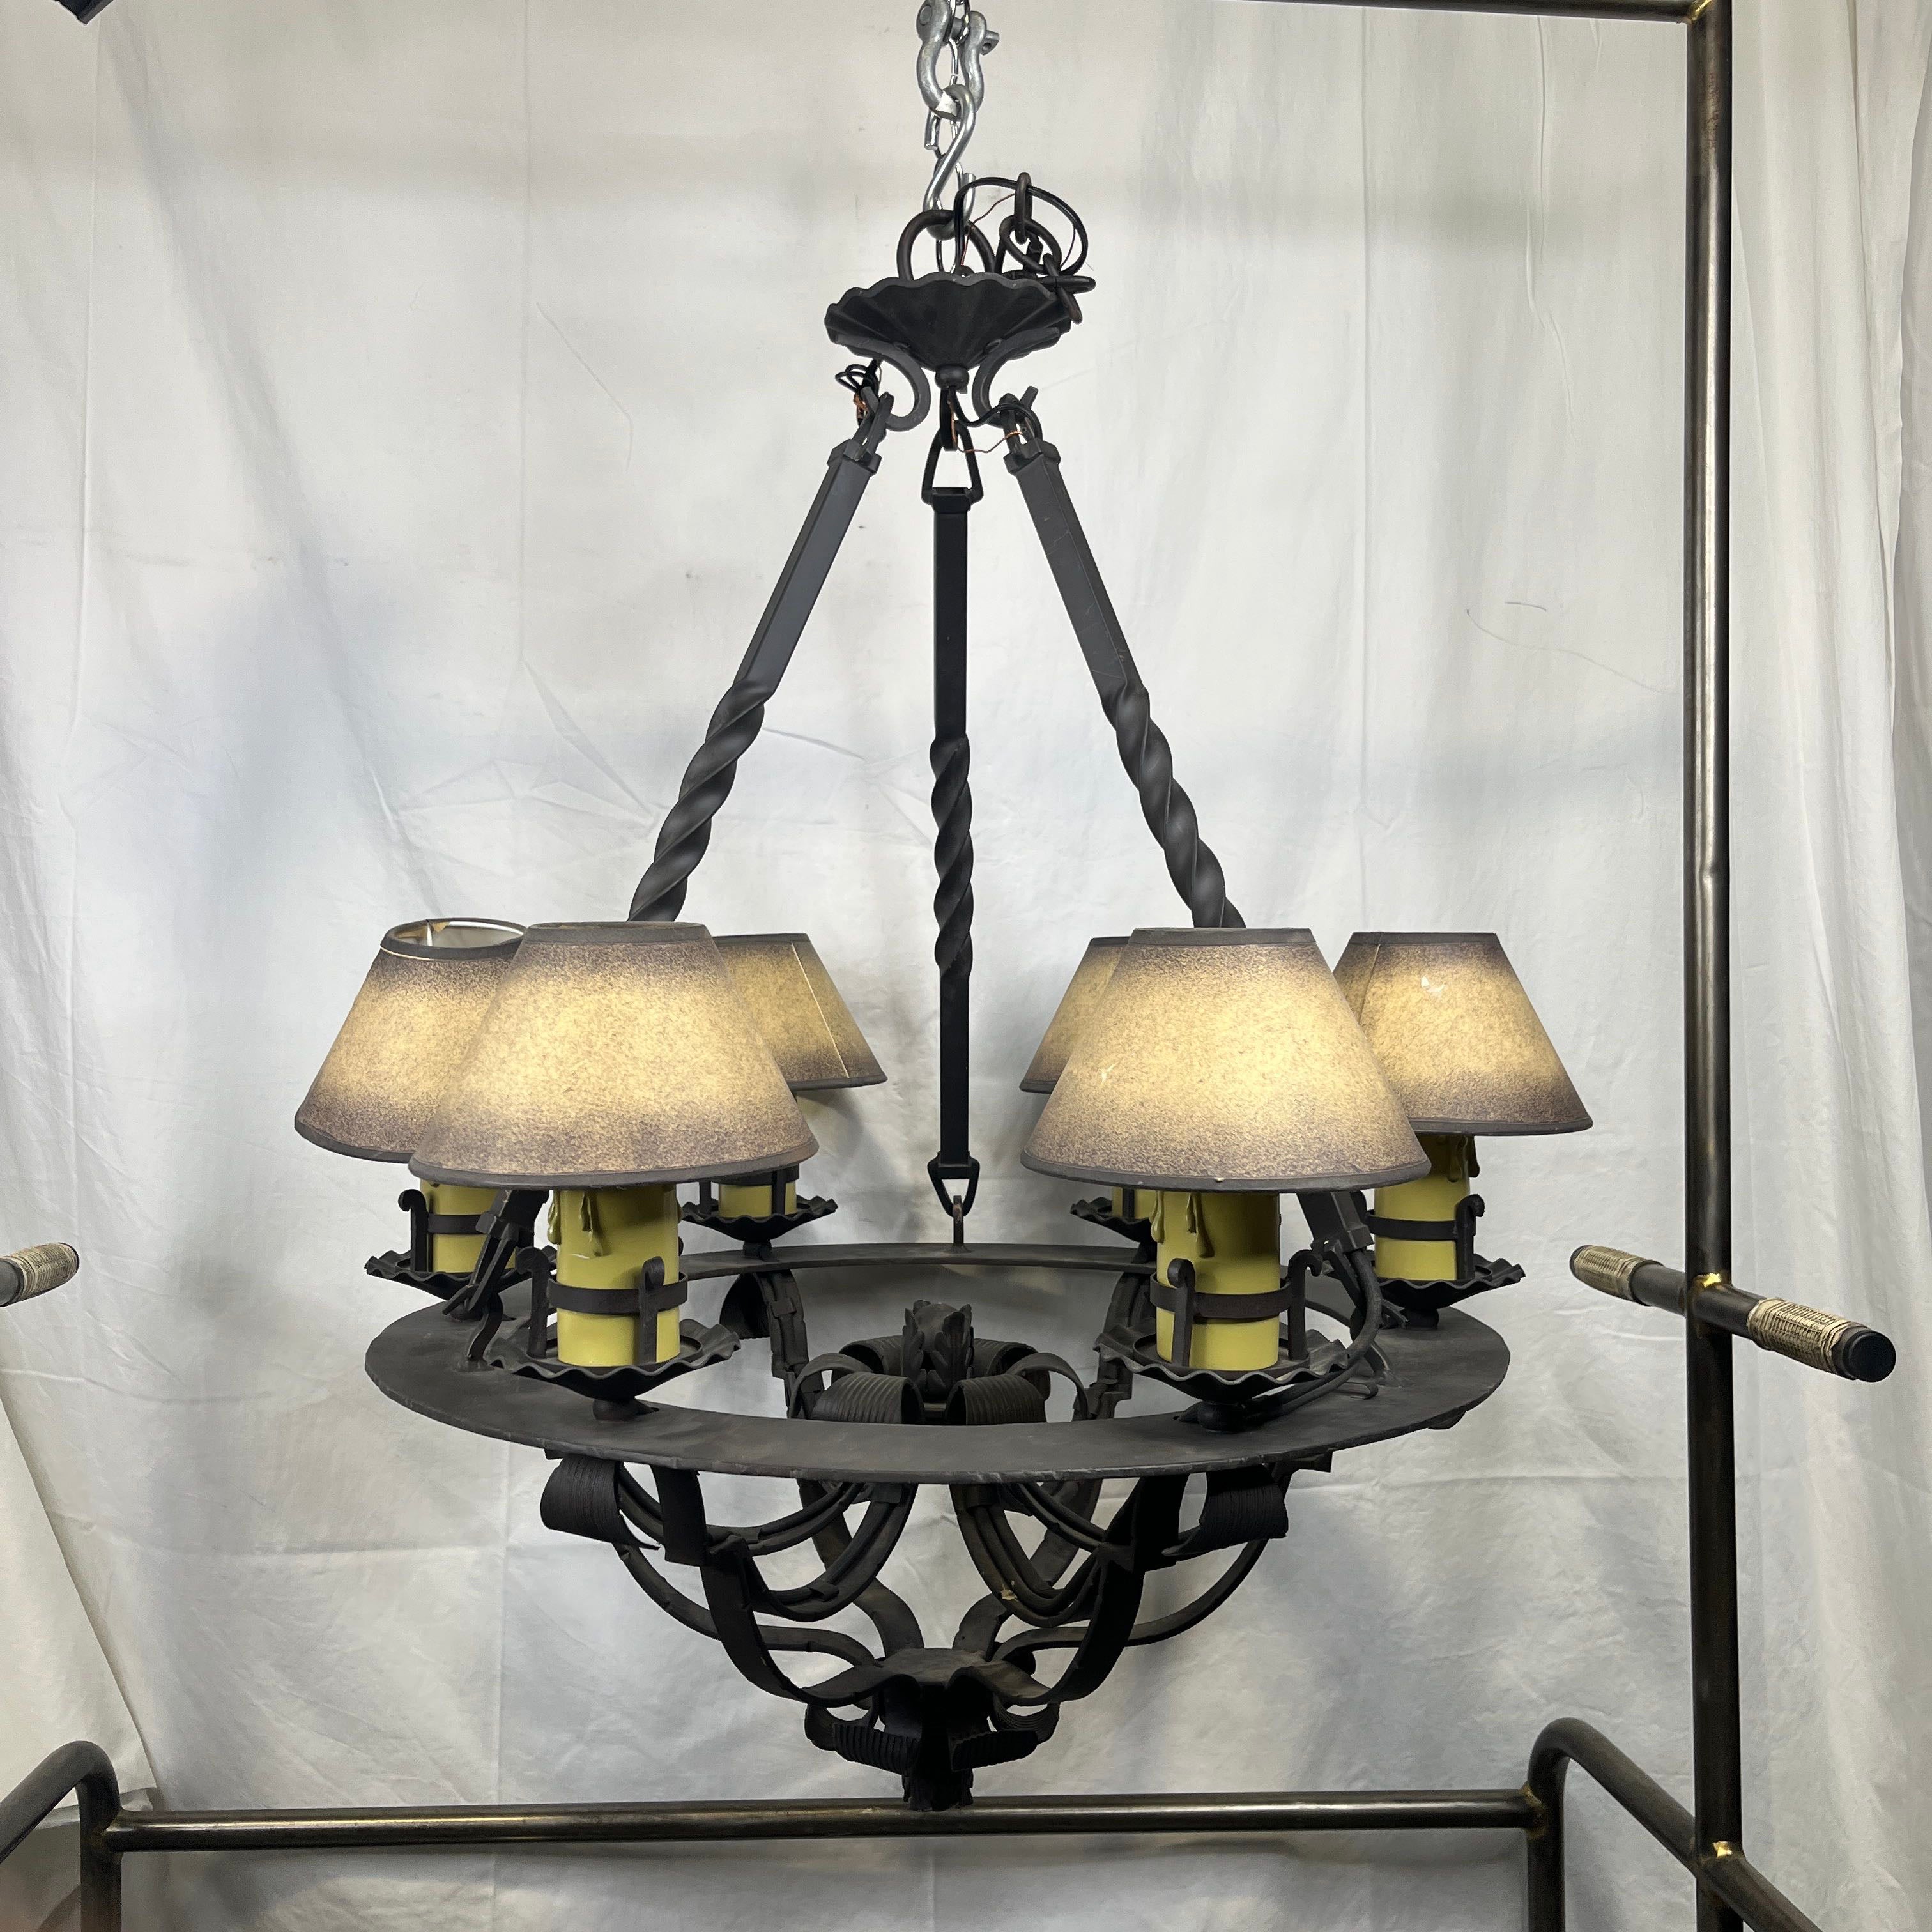 Minka Lavery 906-08 Mission Inn Wrought Iron 6 Light with Faux Candle Accent Chandelier